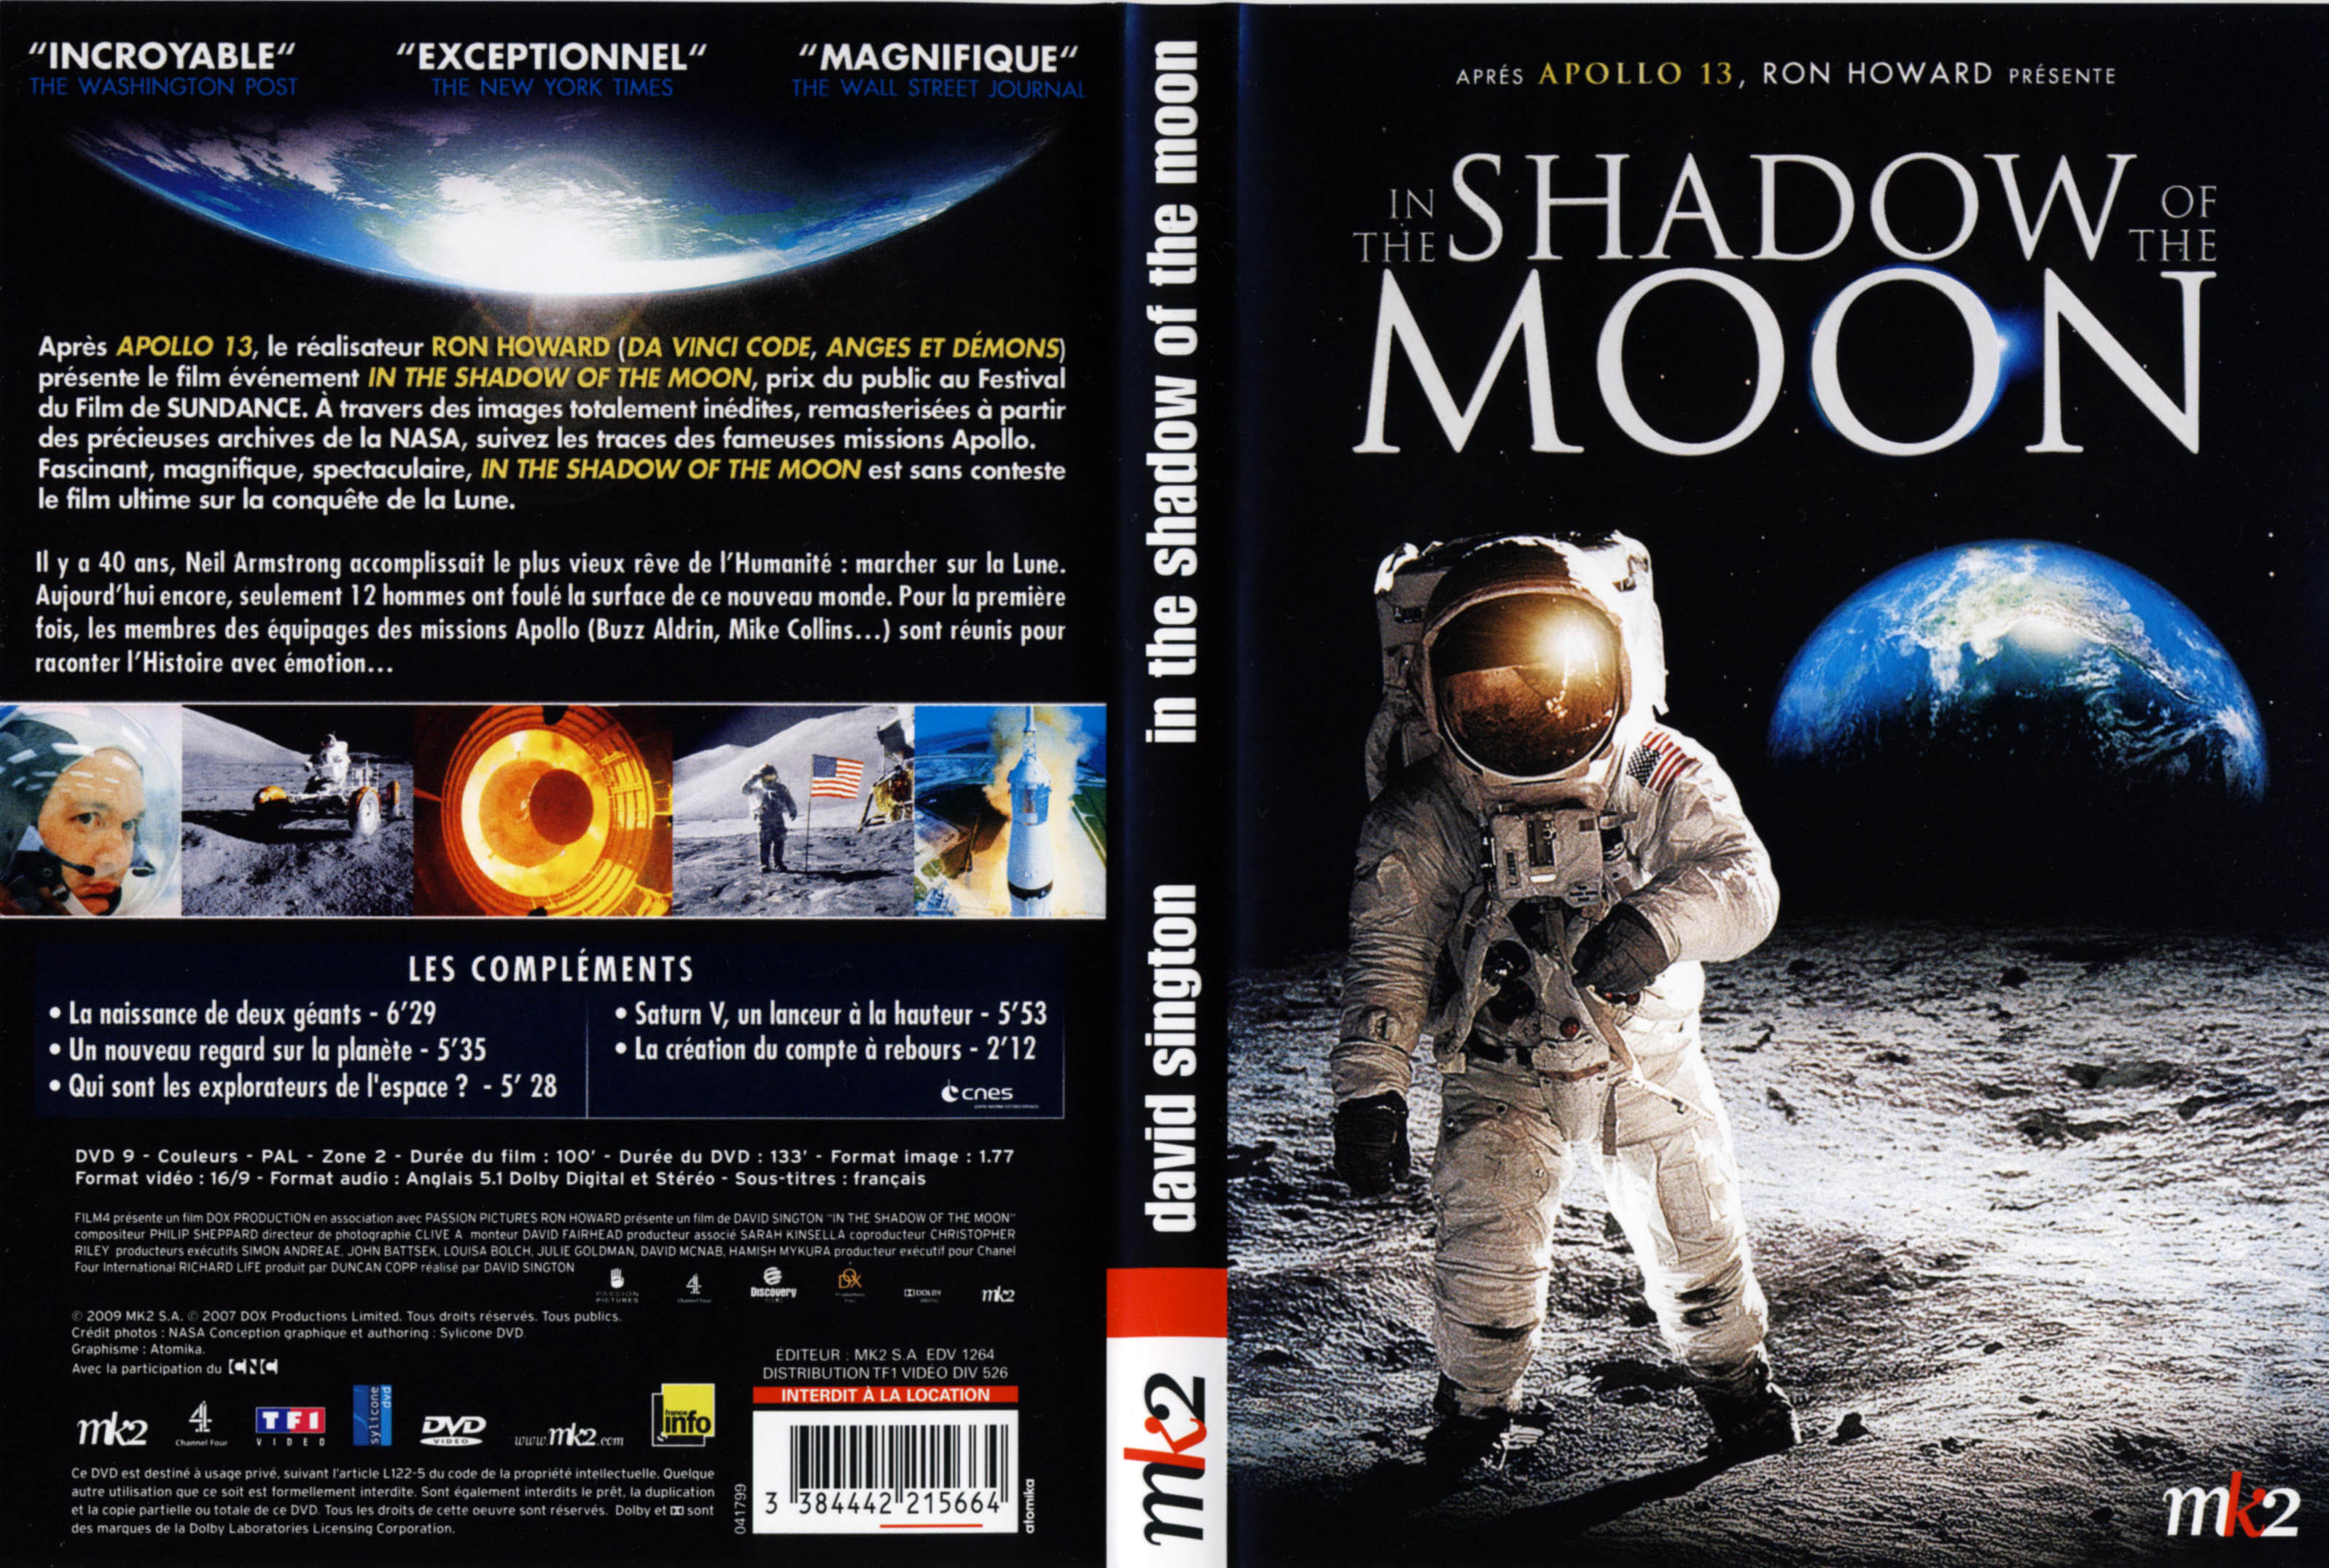 Jaquette DVD In the shadow of the moon